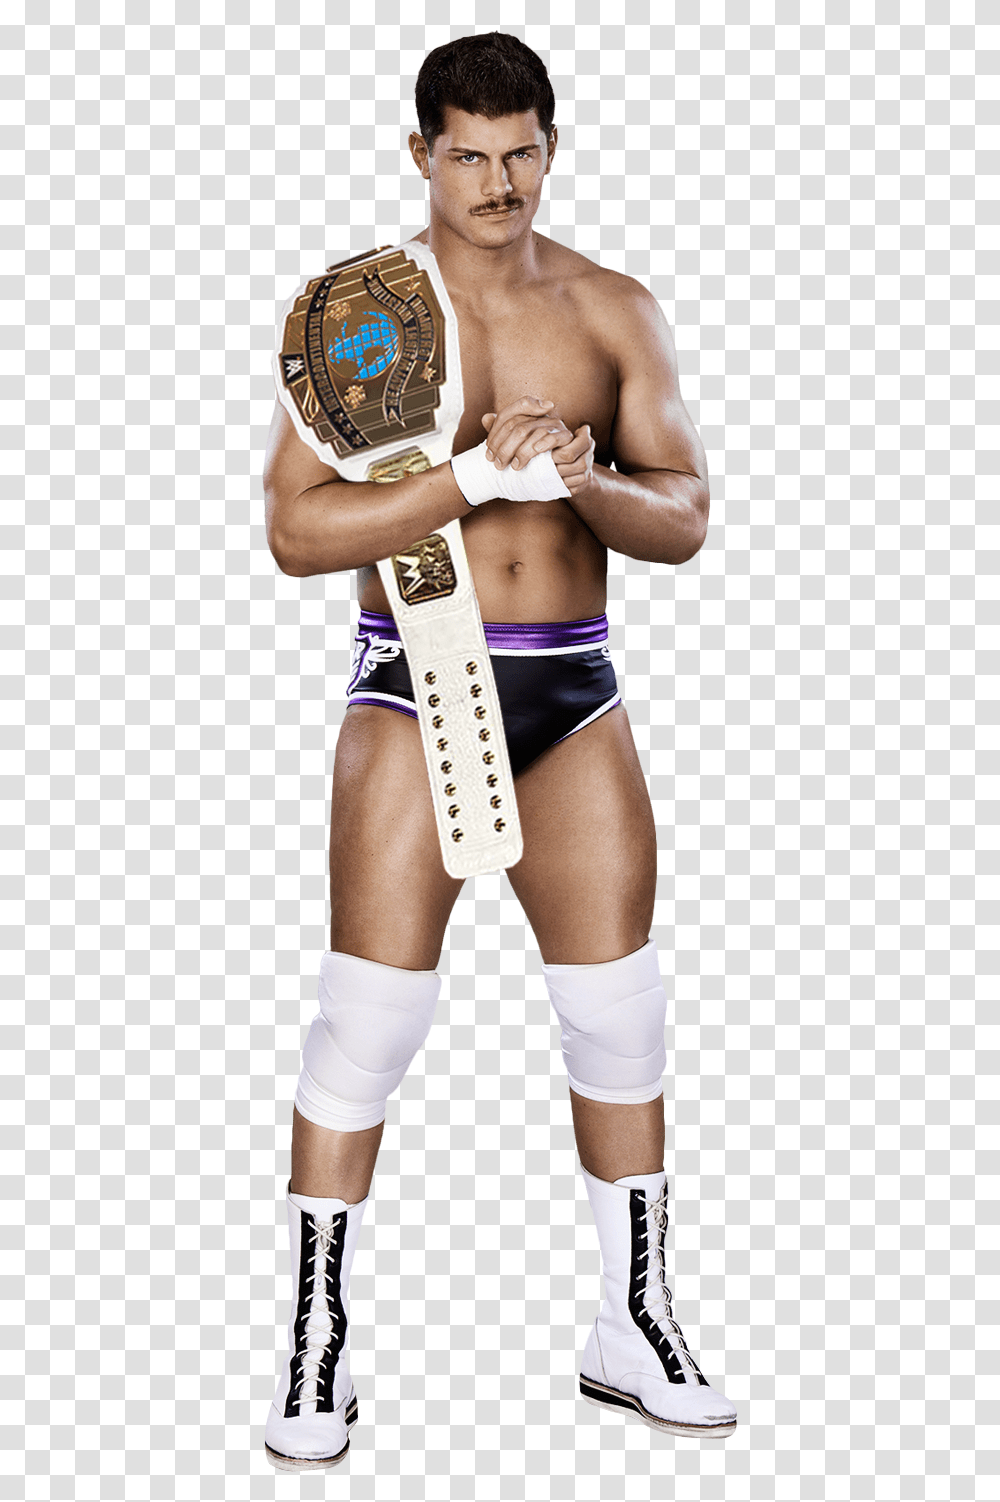 Cody Rhodes Weight And Height, Person, Costume, Shorts Transparent Png